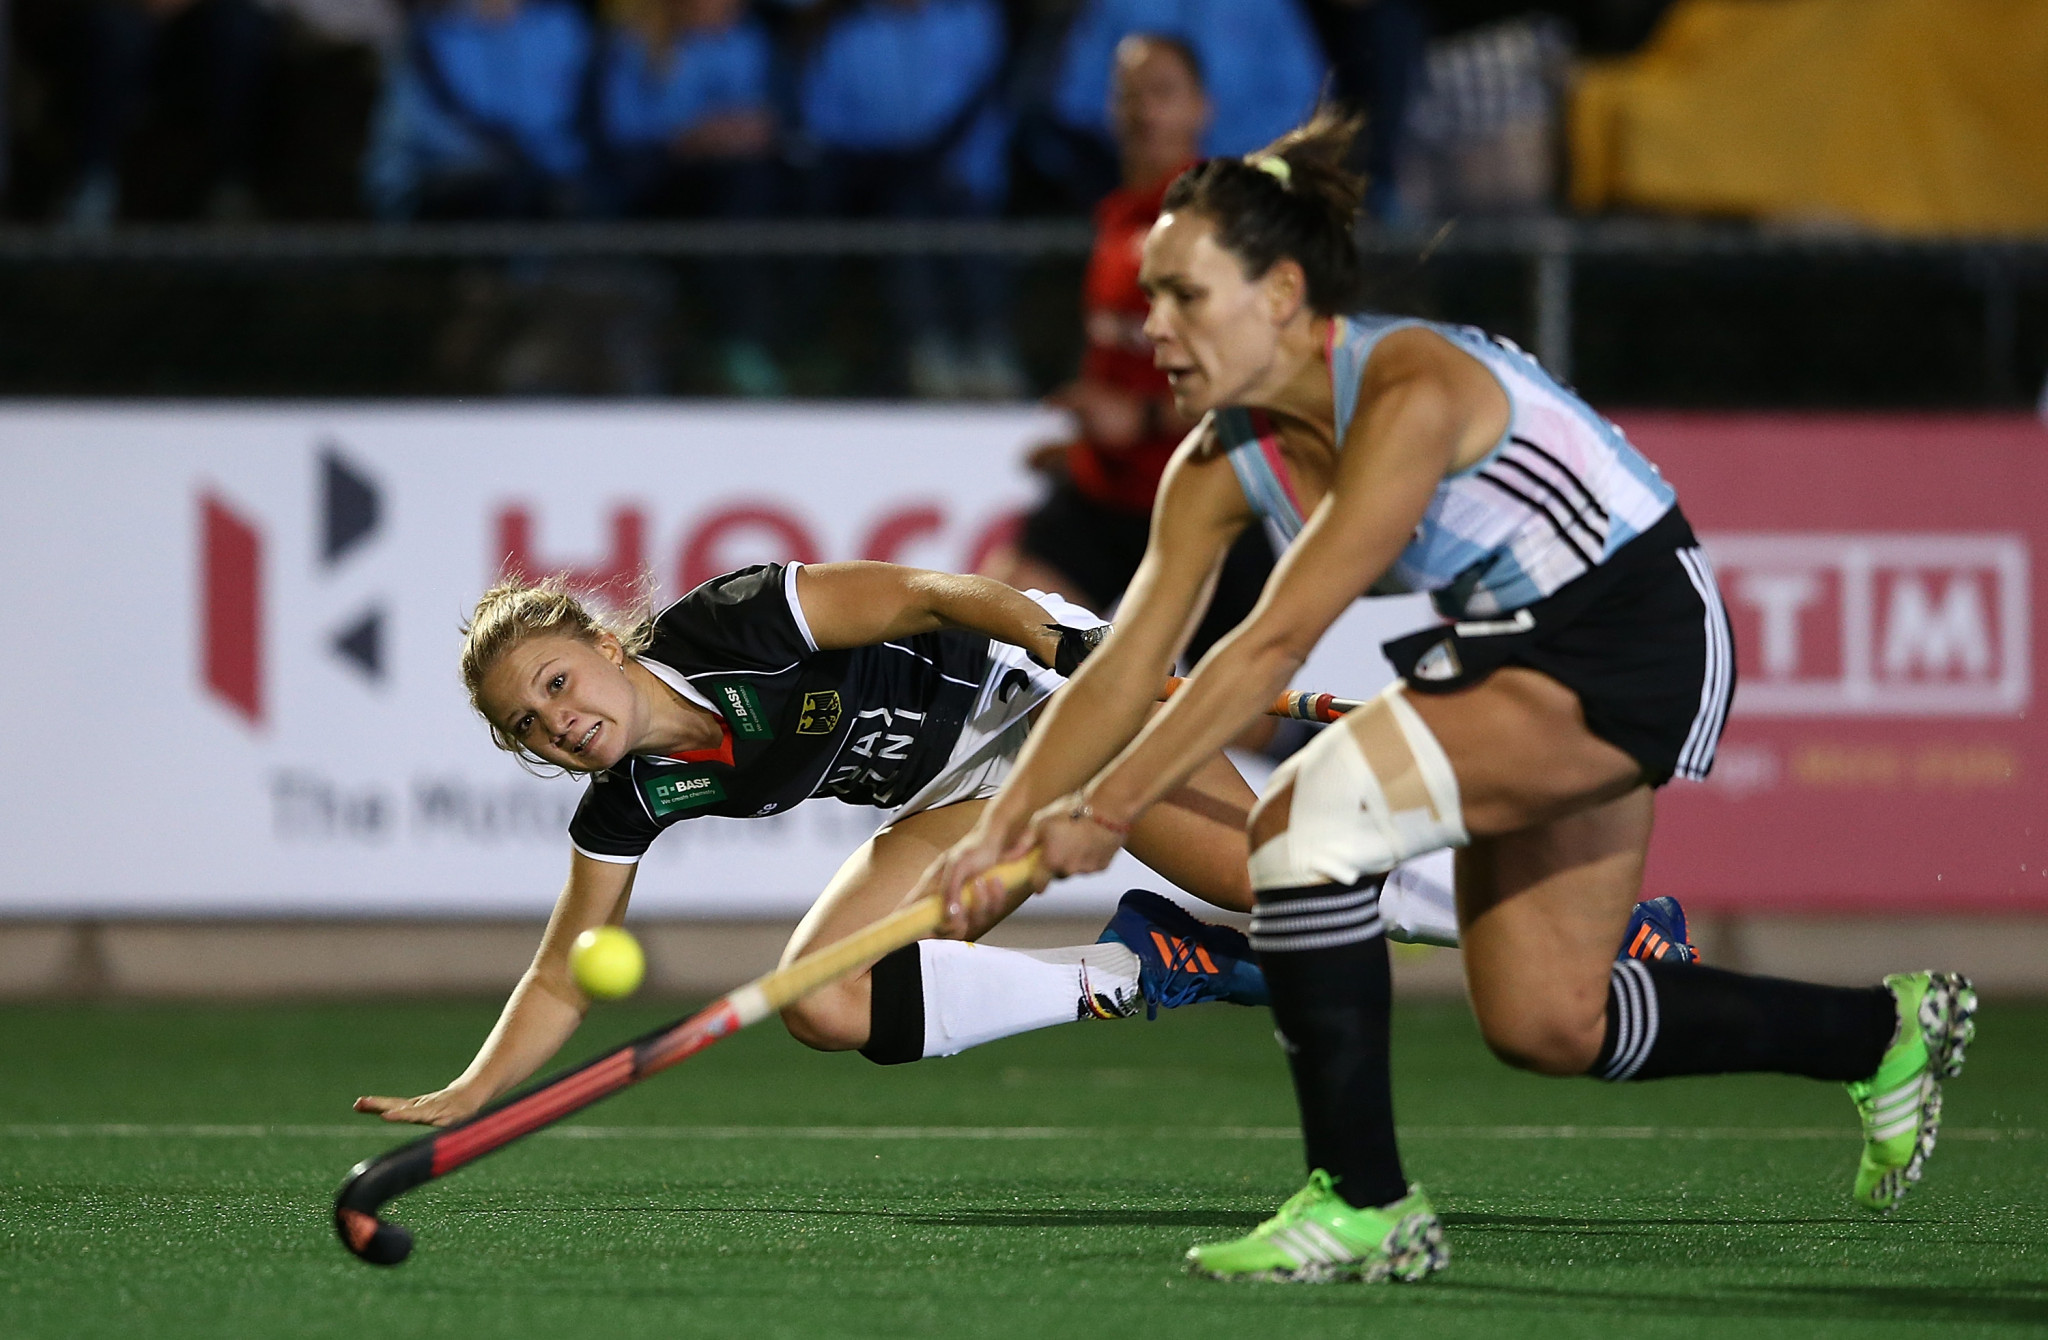 Argentina to begin defence of Women's Hockey World League title in Auckland